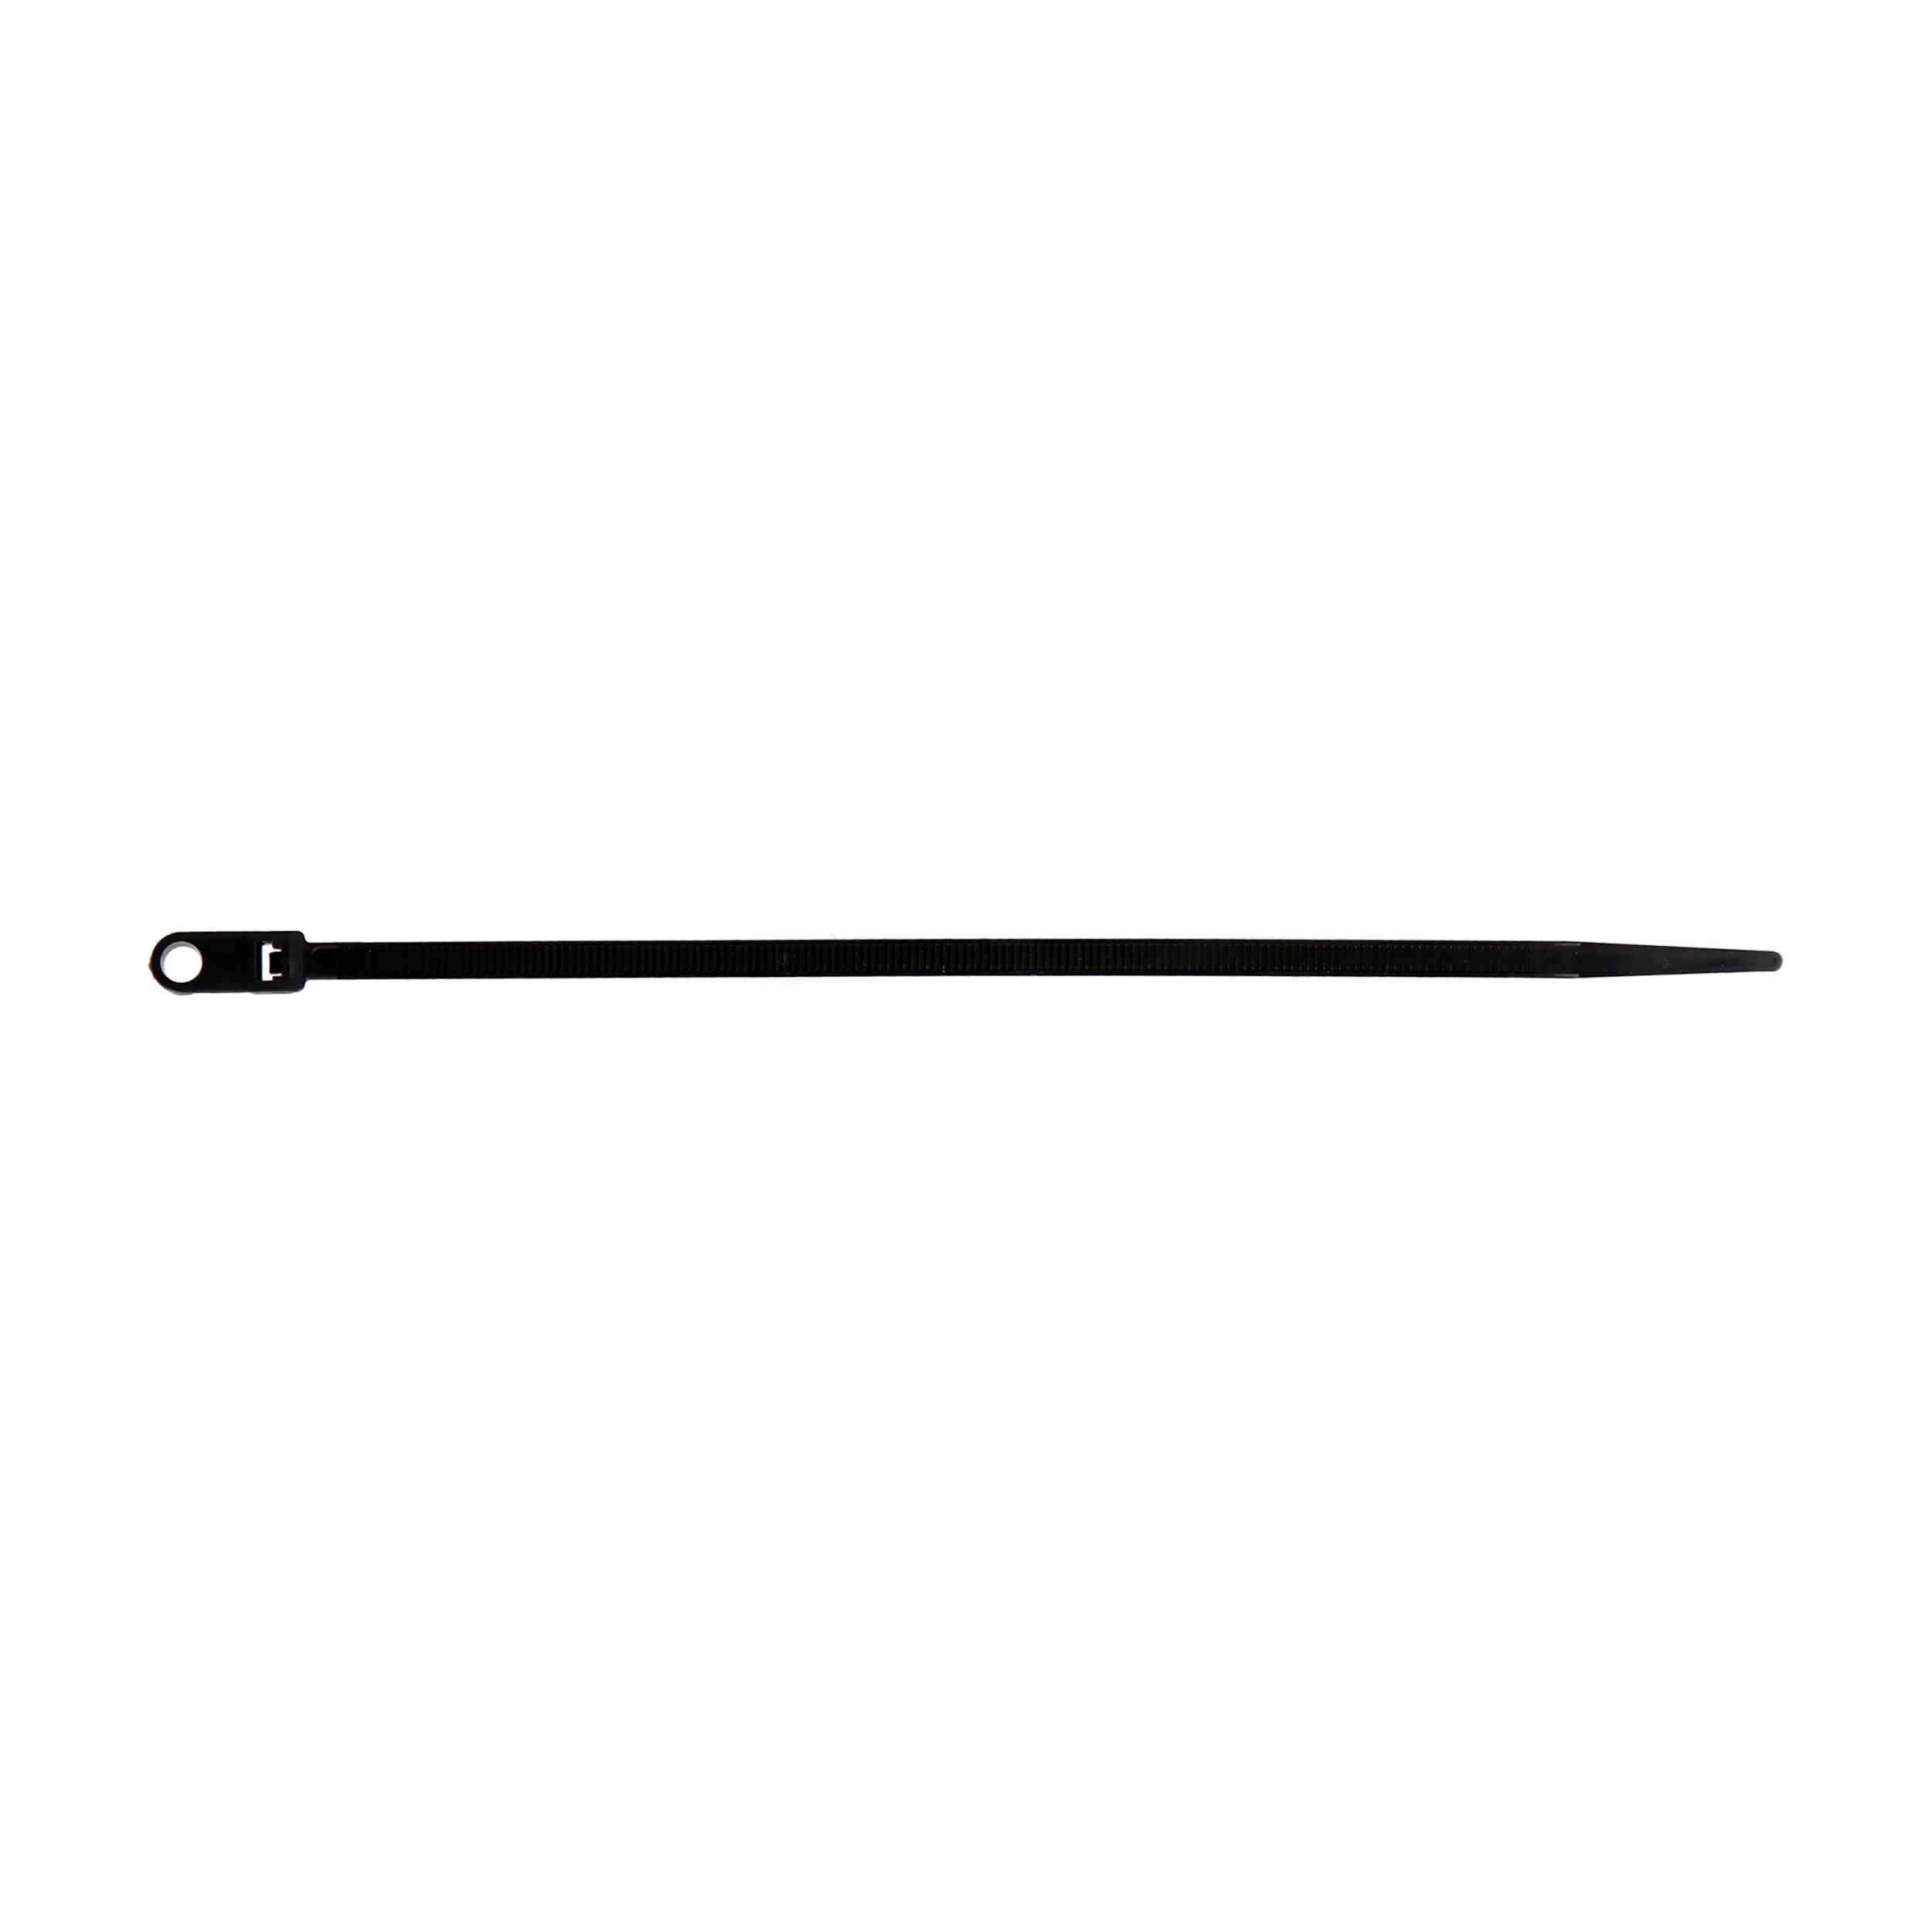 Mounting Hole Cable Tie - 7 inch 50 lb - Package of 100